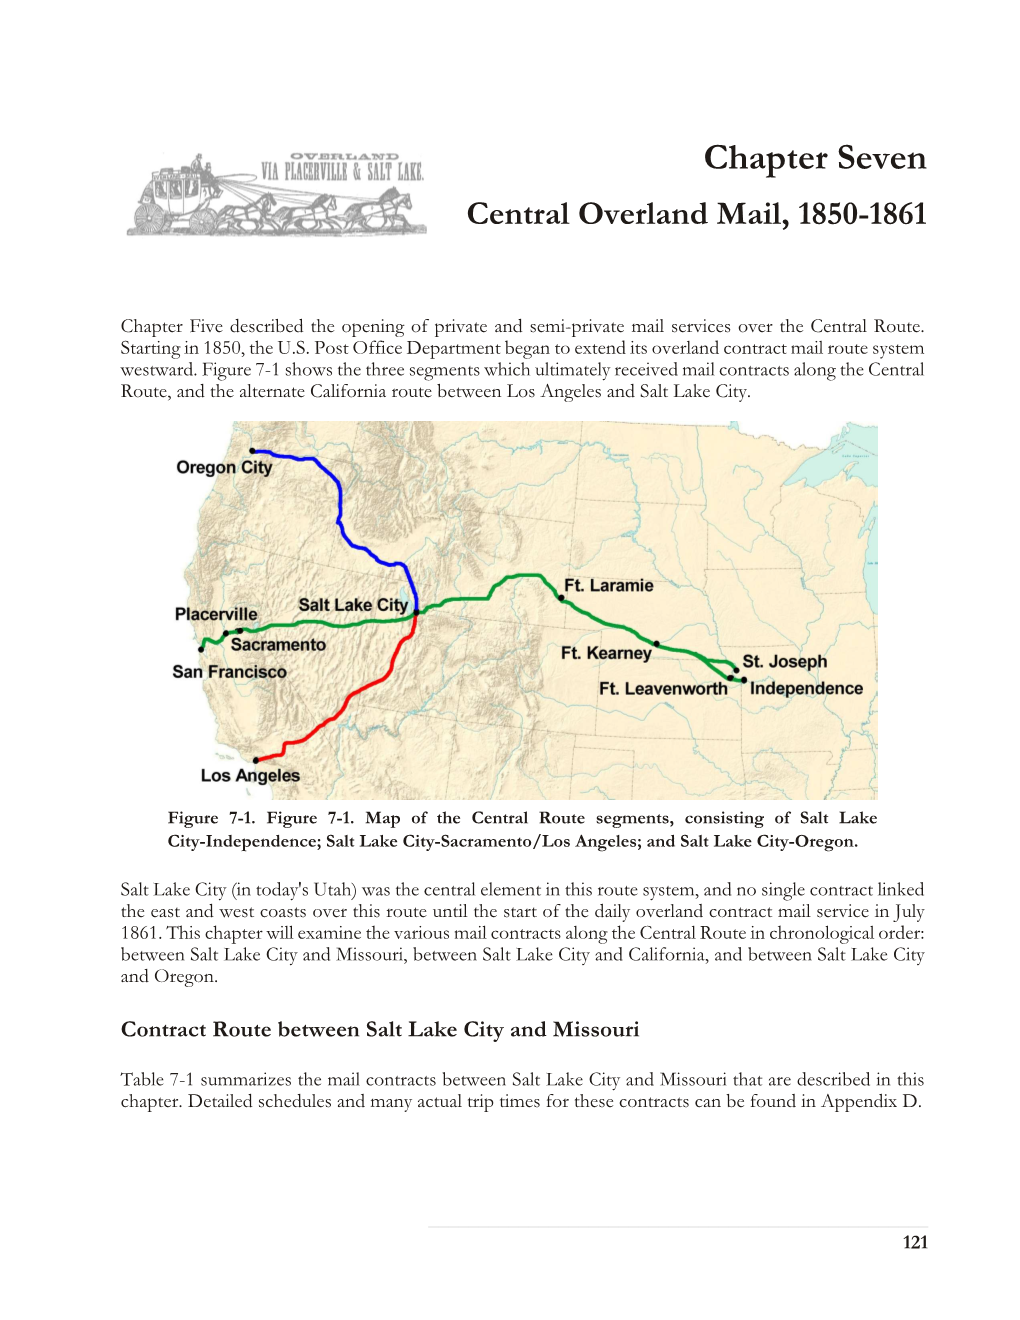 Chapter Seven Central Overland Mail, 1850-1861